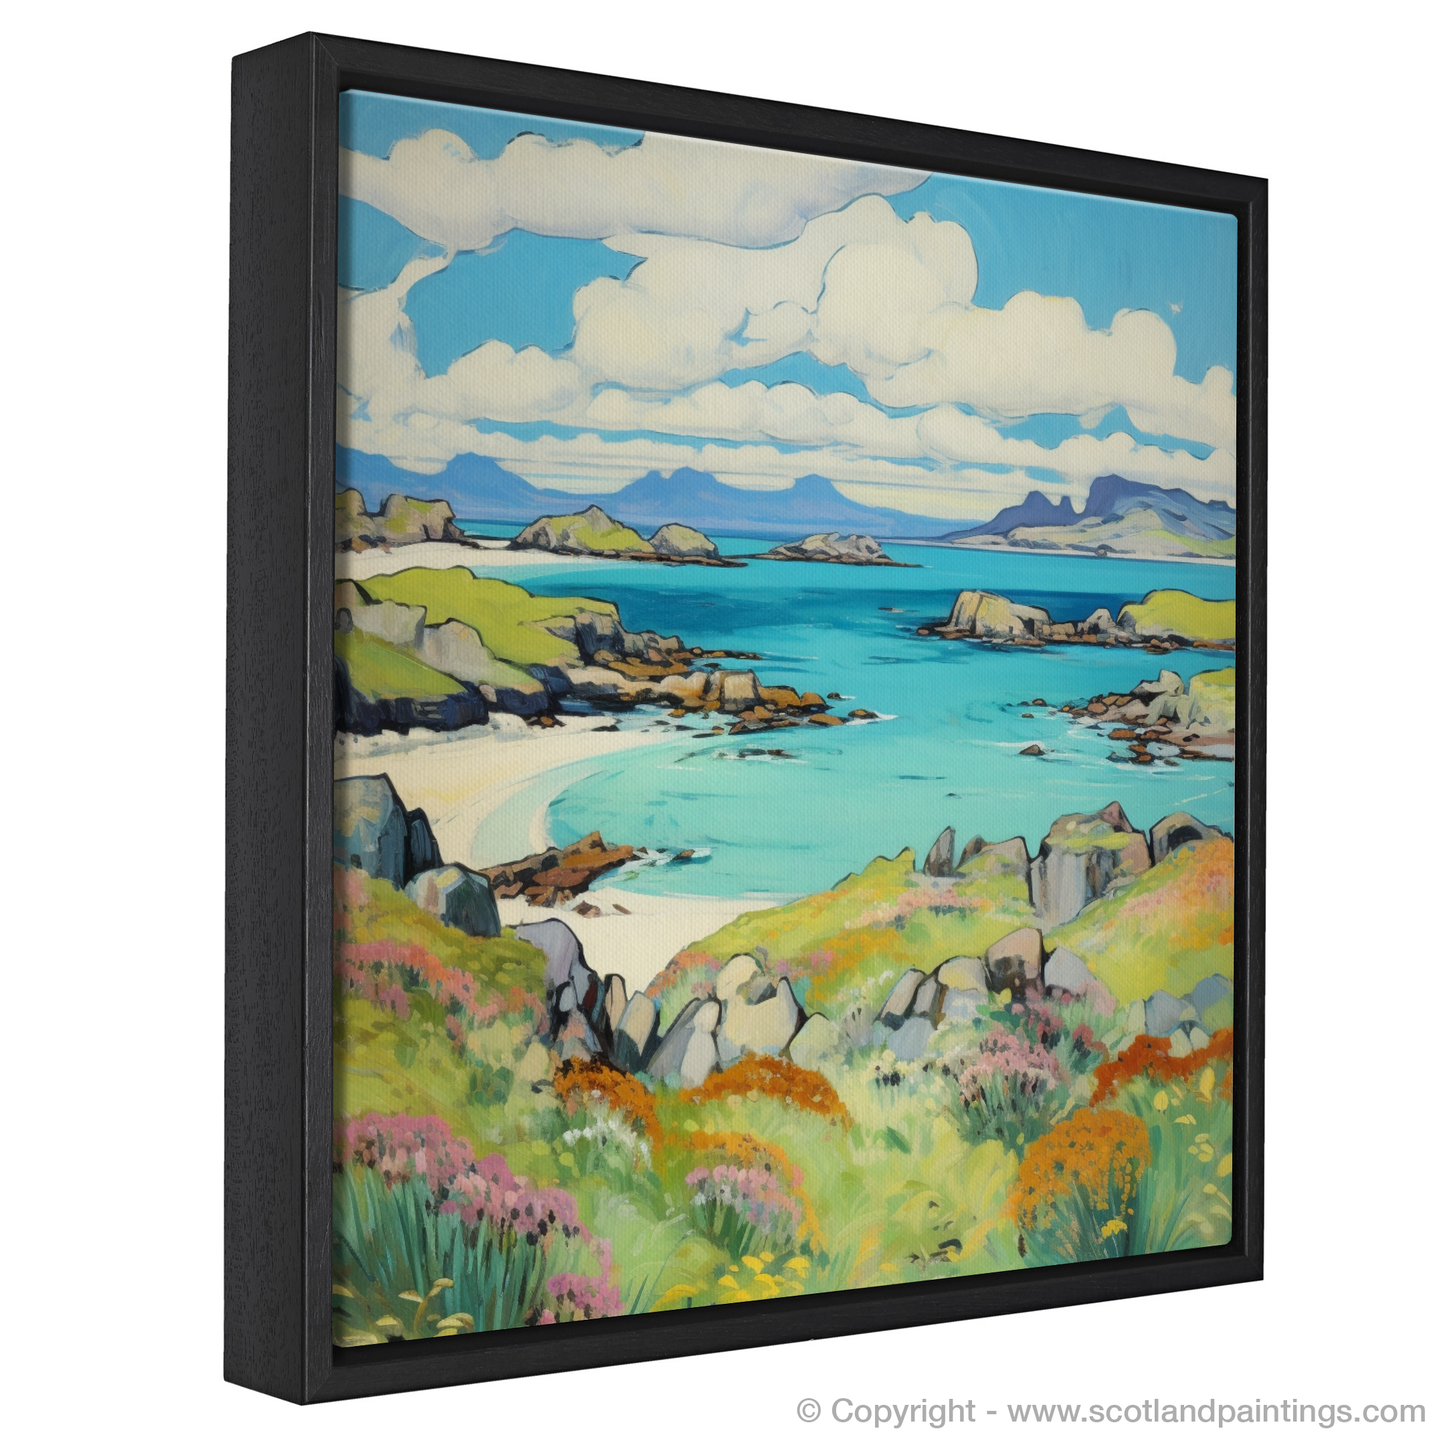 Painting and Art Print of Isle of Skyes smaller isles, Inner Hebrides in summer entitled "Summer Serenade on the Isle of Skye's Isles".